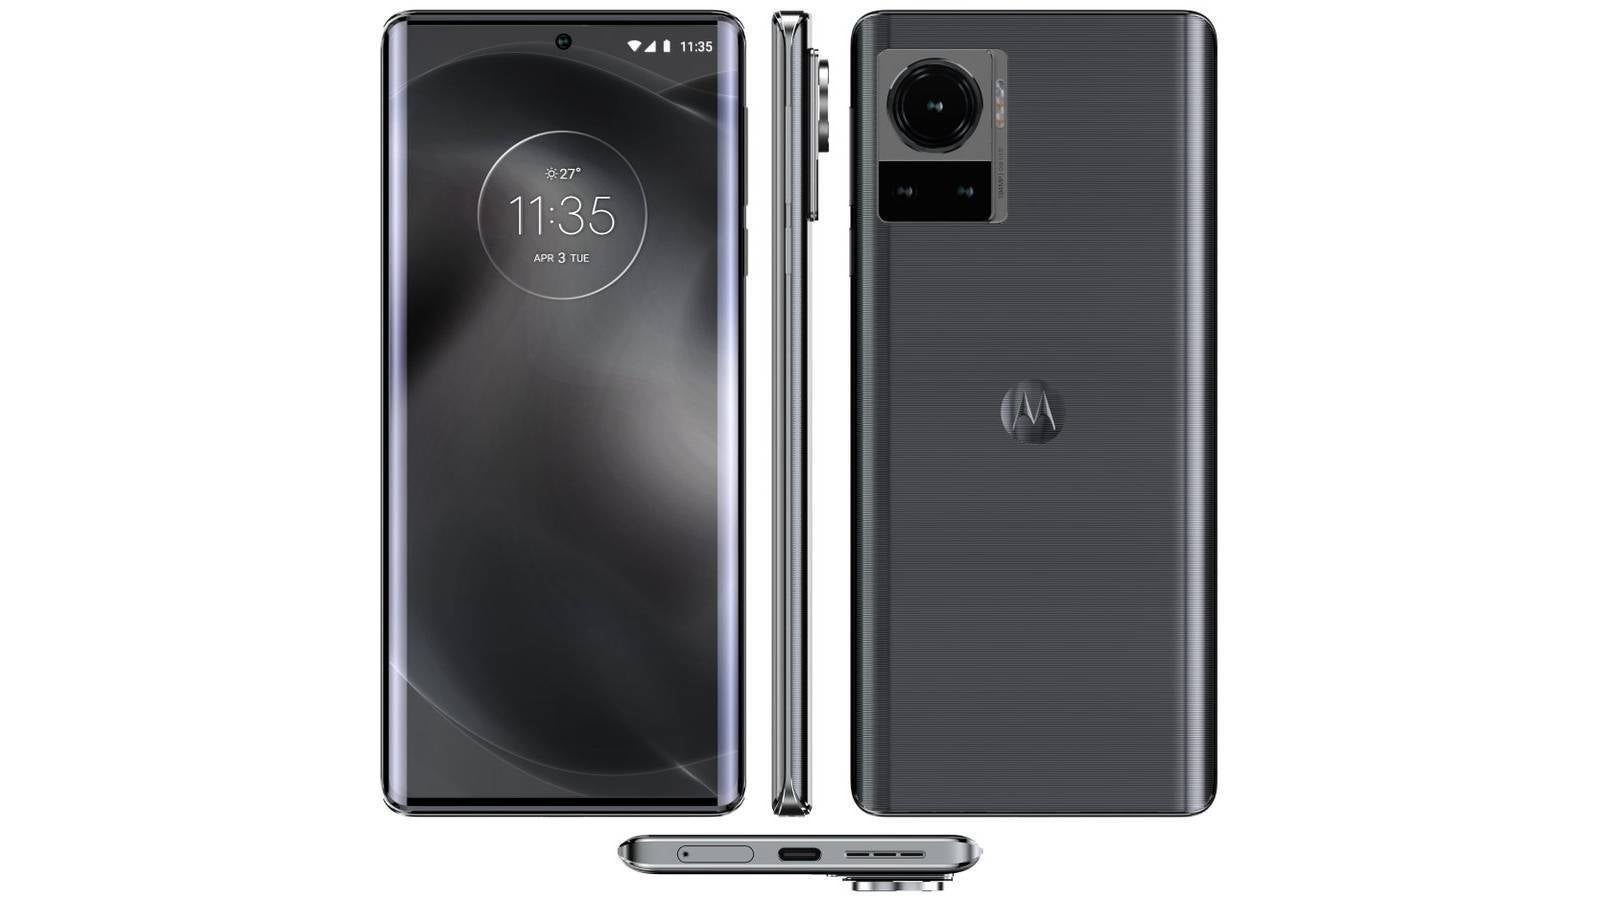 Leaked Motorola Frontier images - Next Motorola specs monster could be unveiled on May 10